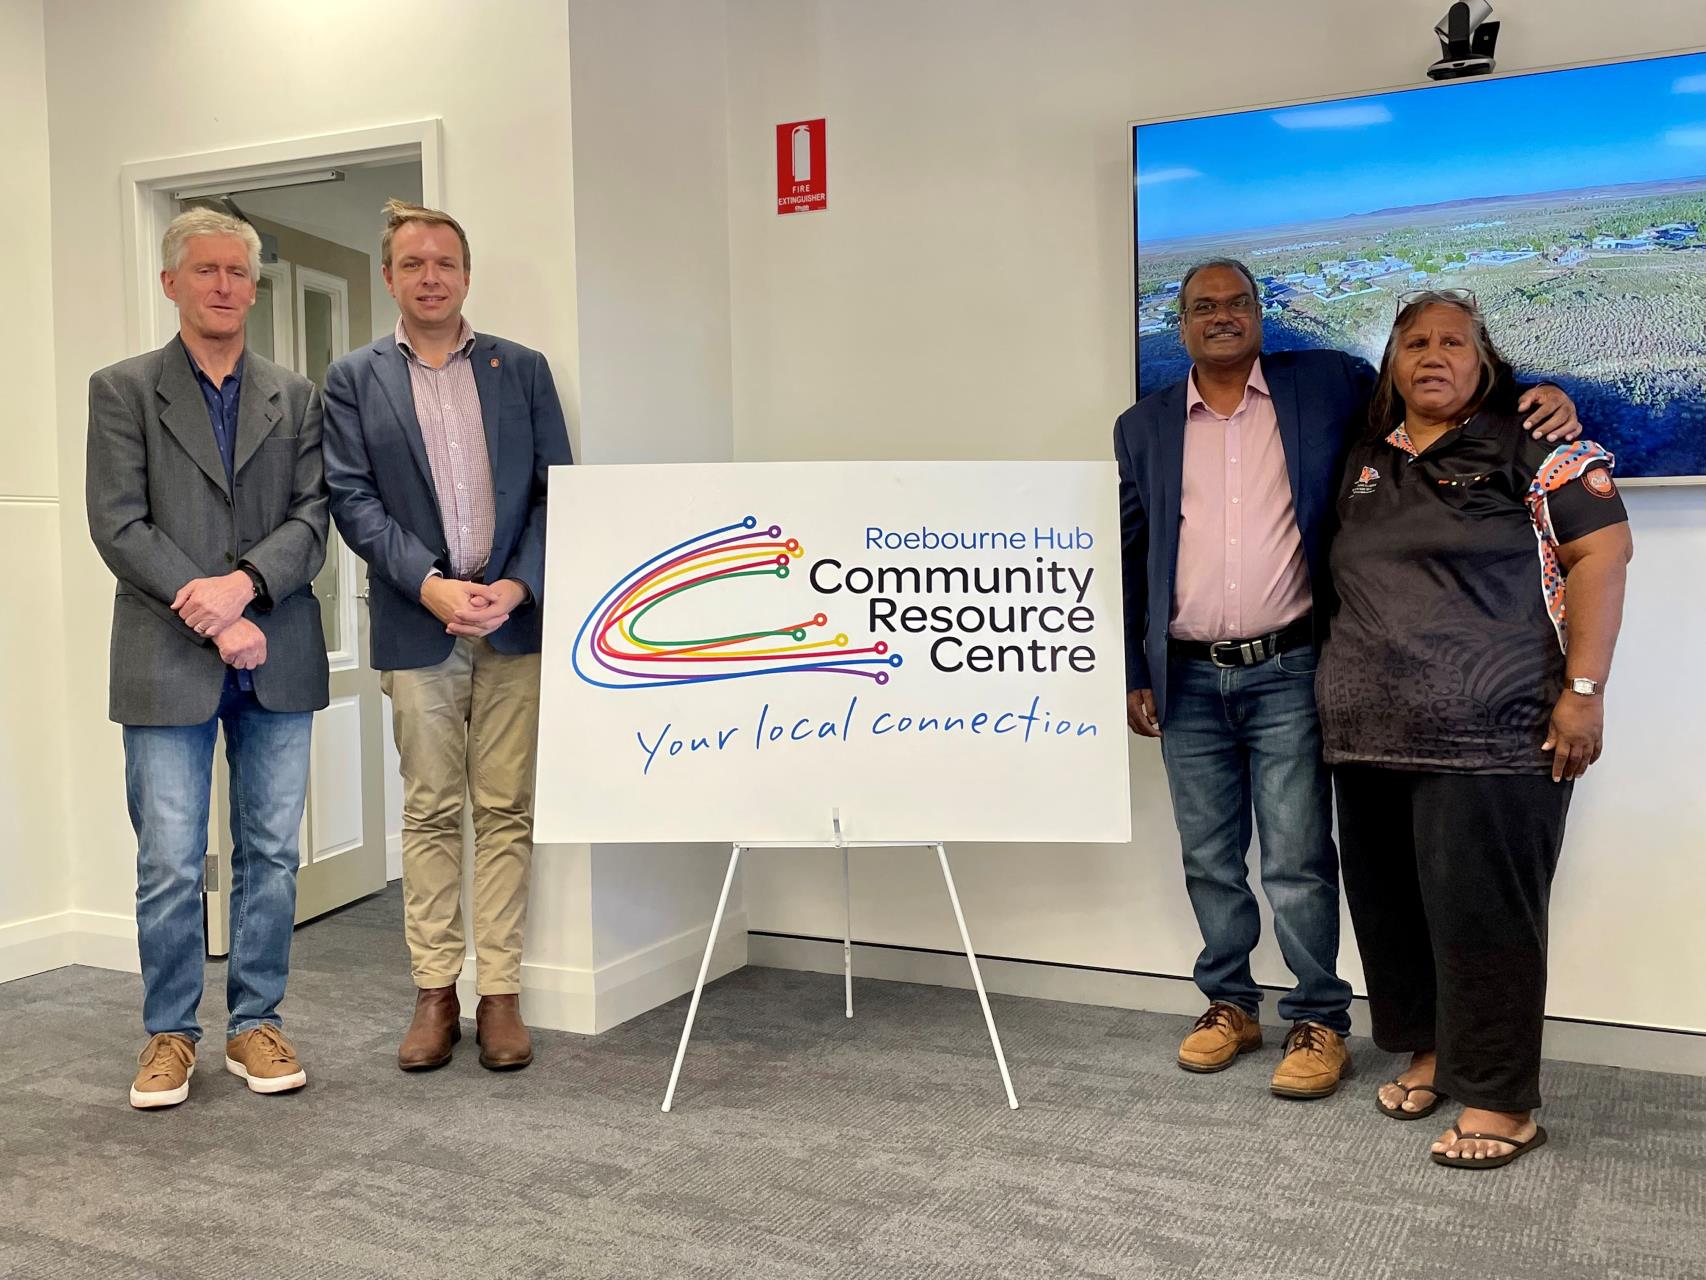 Community Resource Centre to support Roebourne residents and businesses